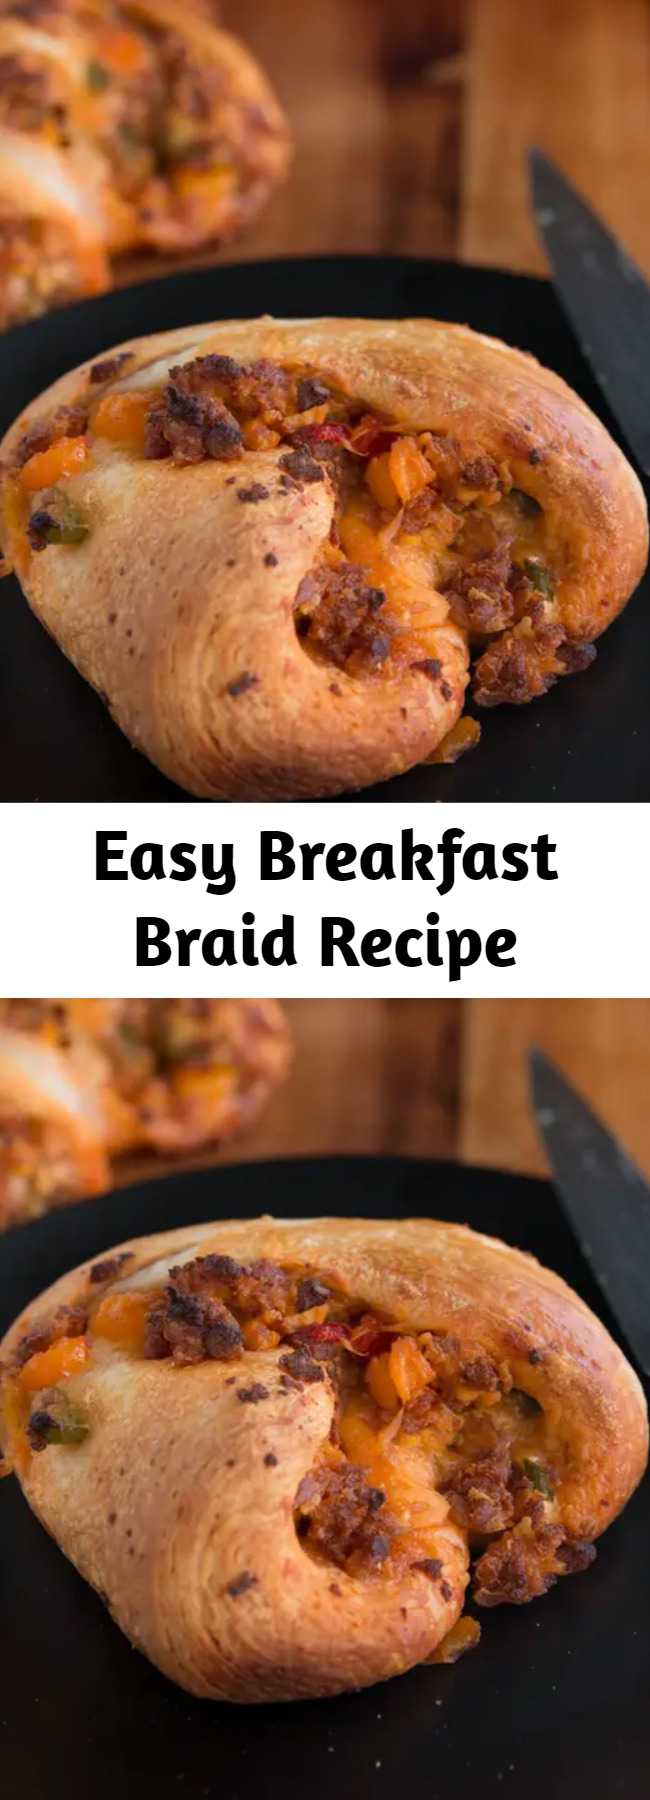 Easy Breakfast Braid Recipe - This breakfast braid is so delicious. You're gonna wanna devour it.